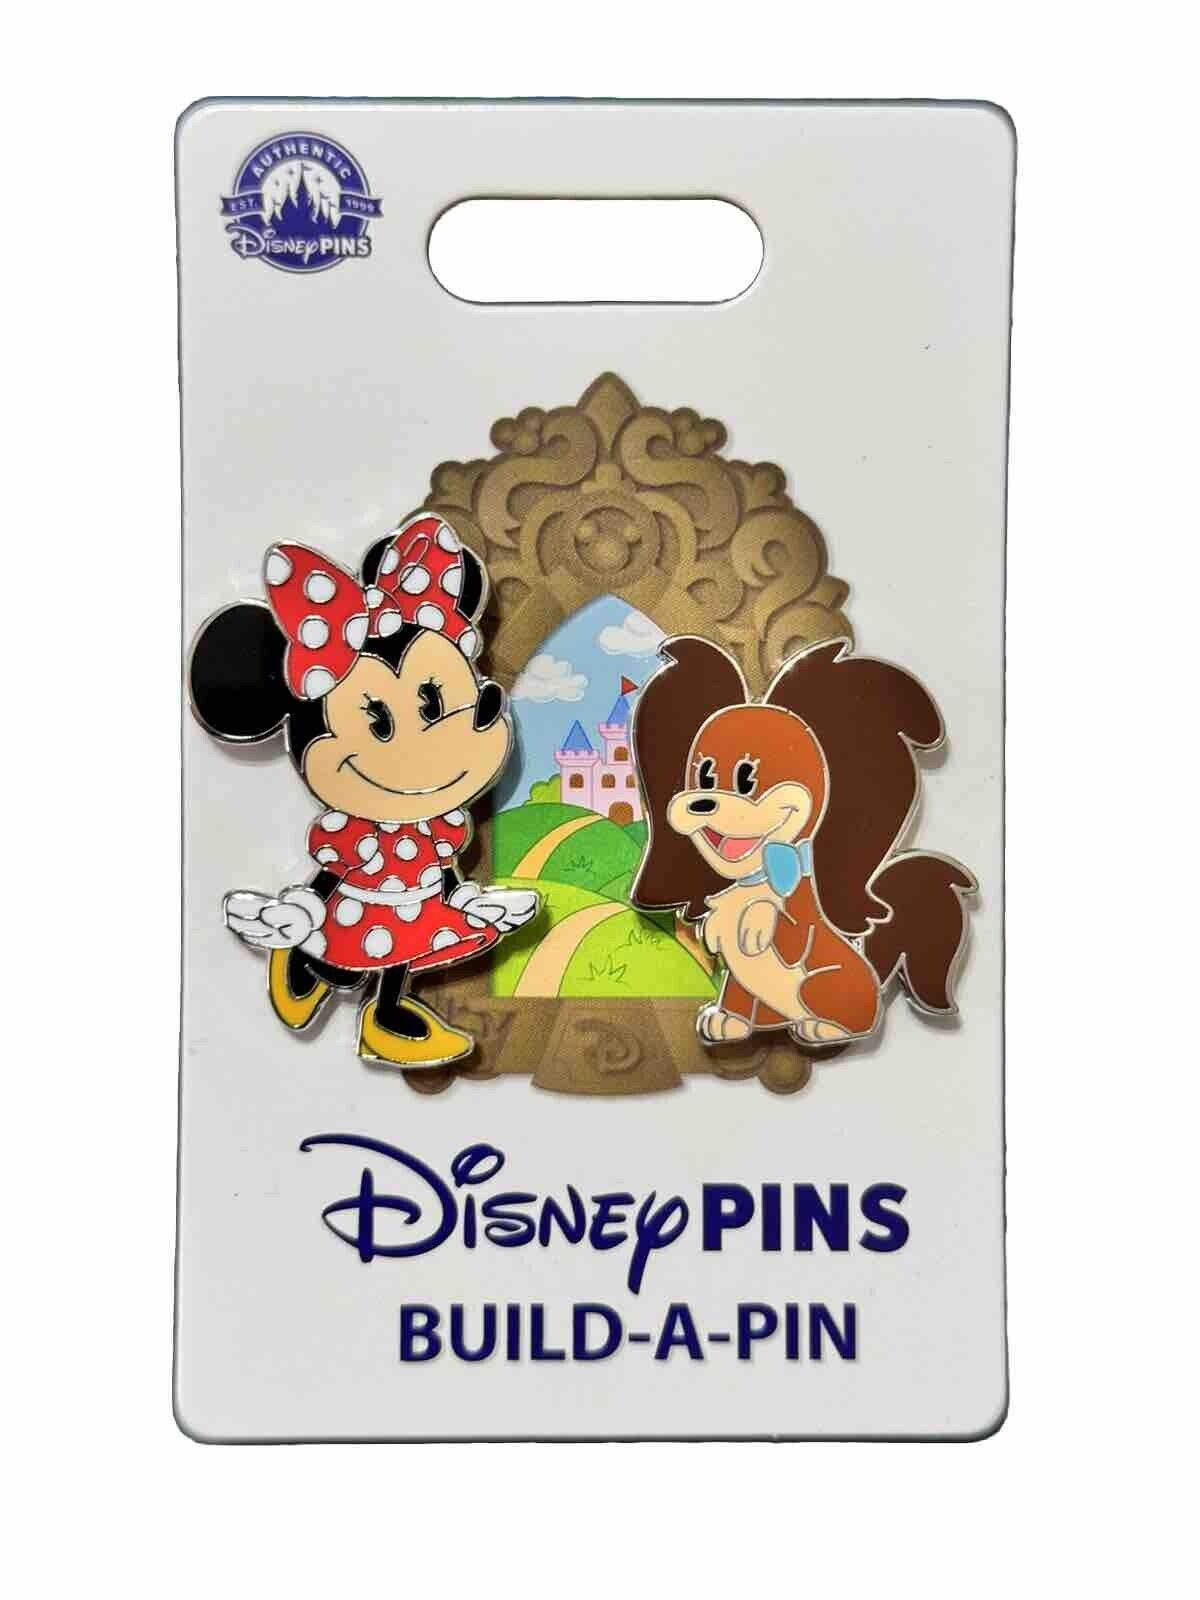 2024 Disney Parks Build A Pin 2 Pin Set Minnie Mouse With Fifi New